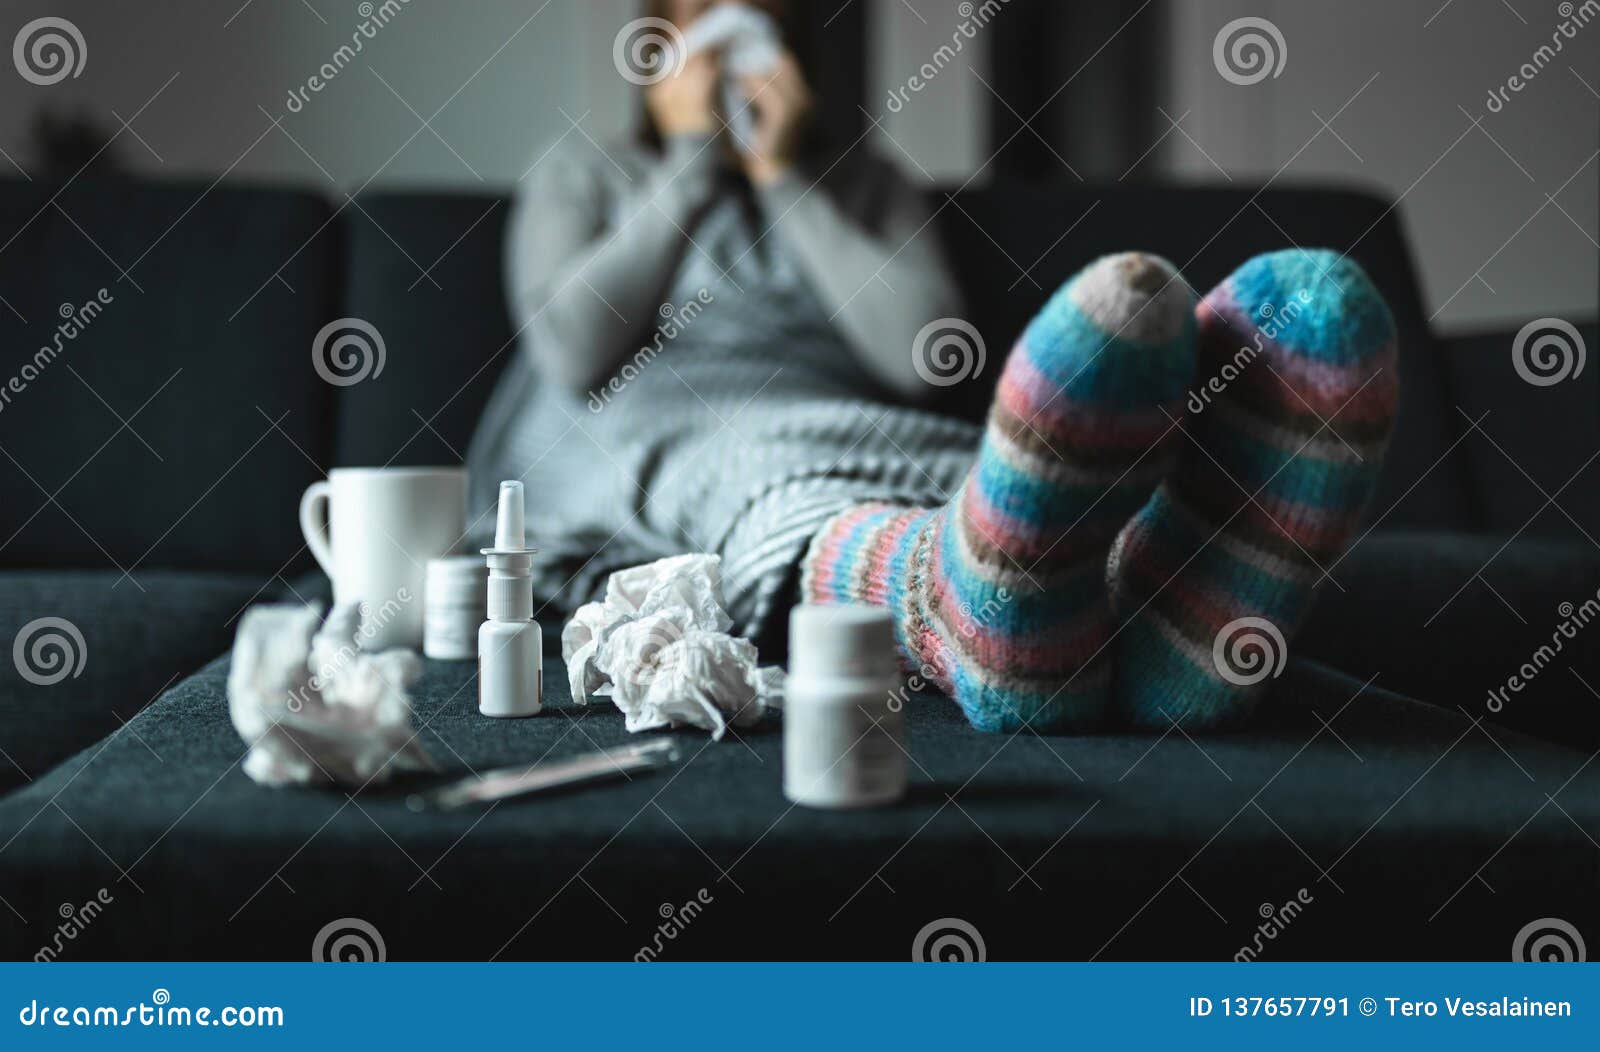 woman sneezing and blowing nose with tissue and handkerchief. sick and ill person with flu, cold medicine and woolen socks.